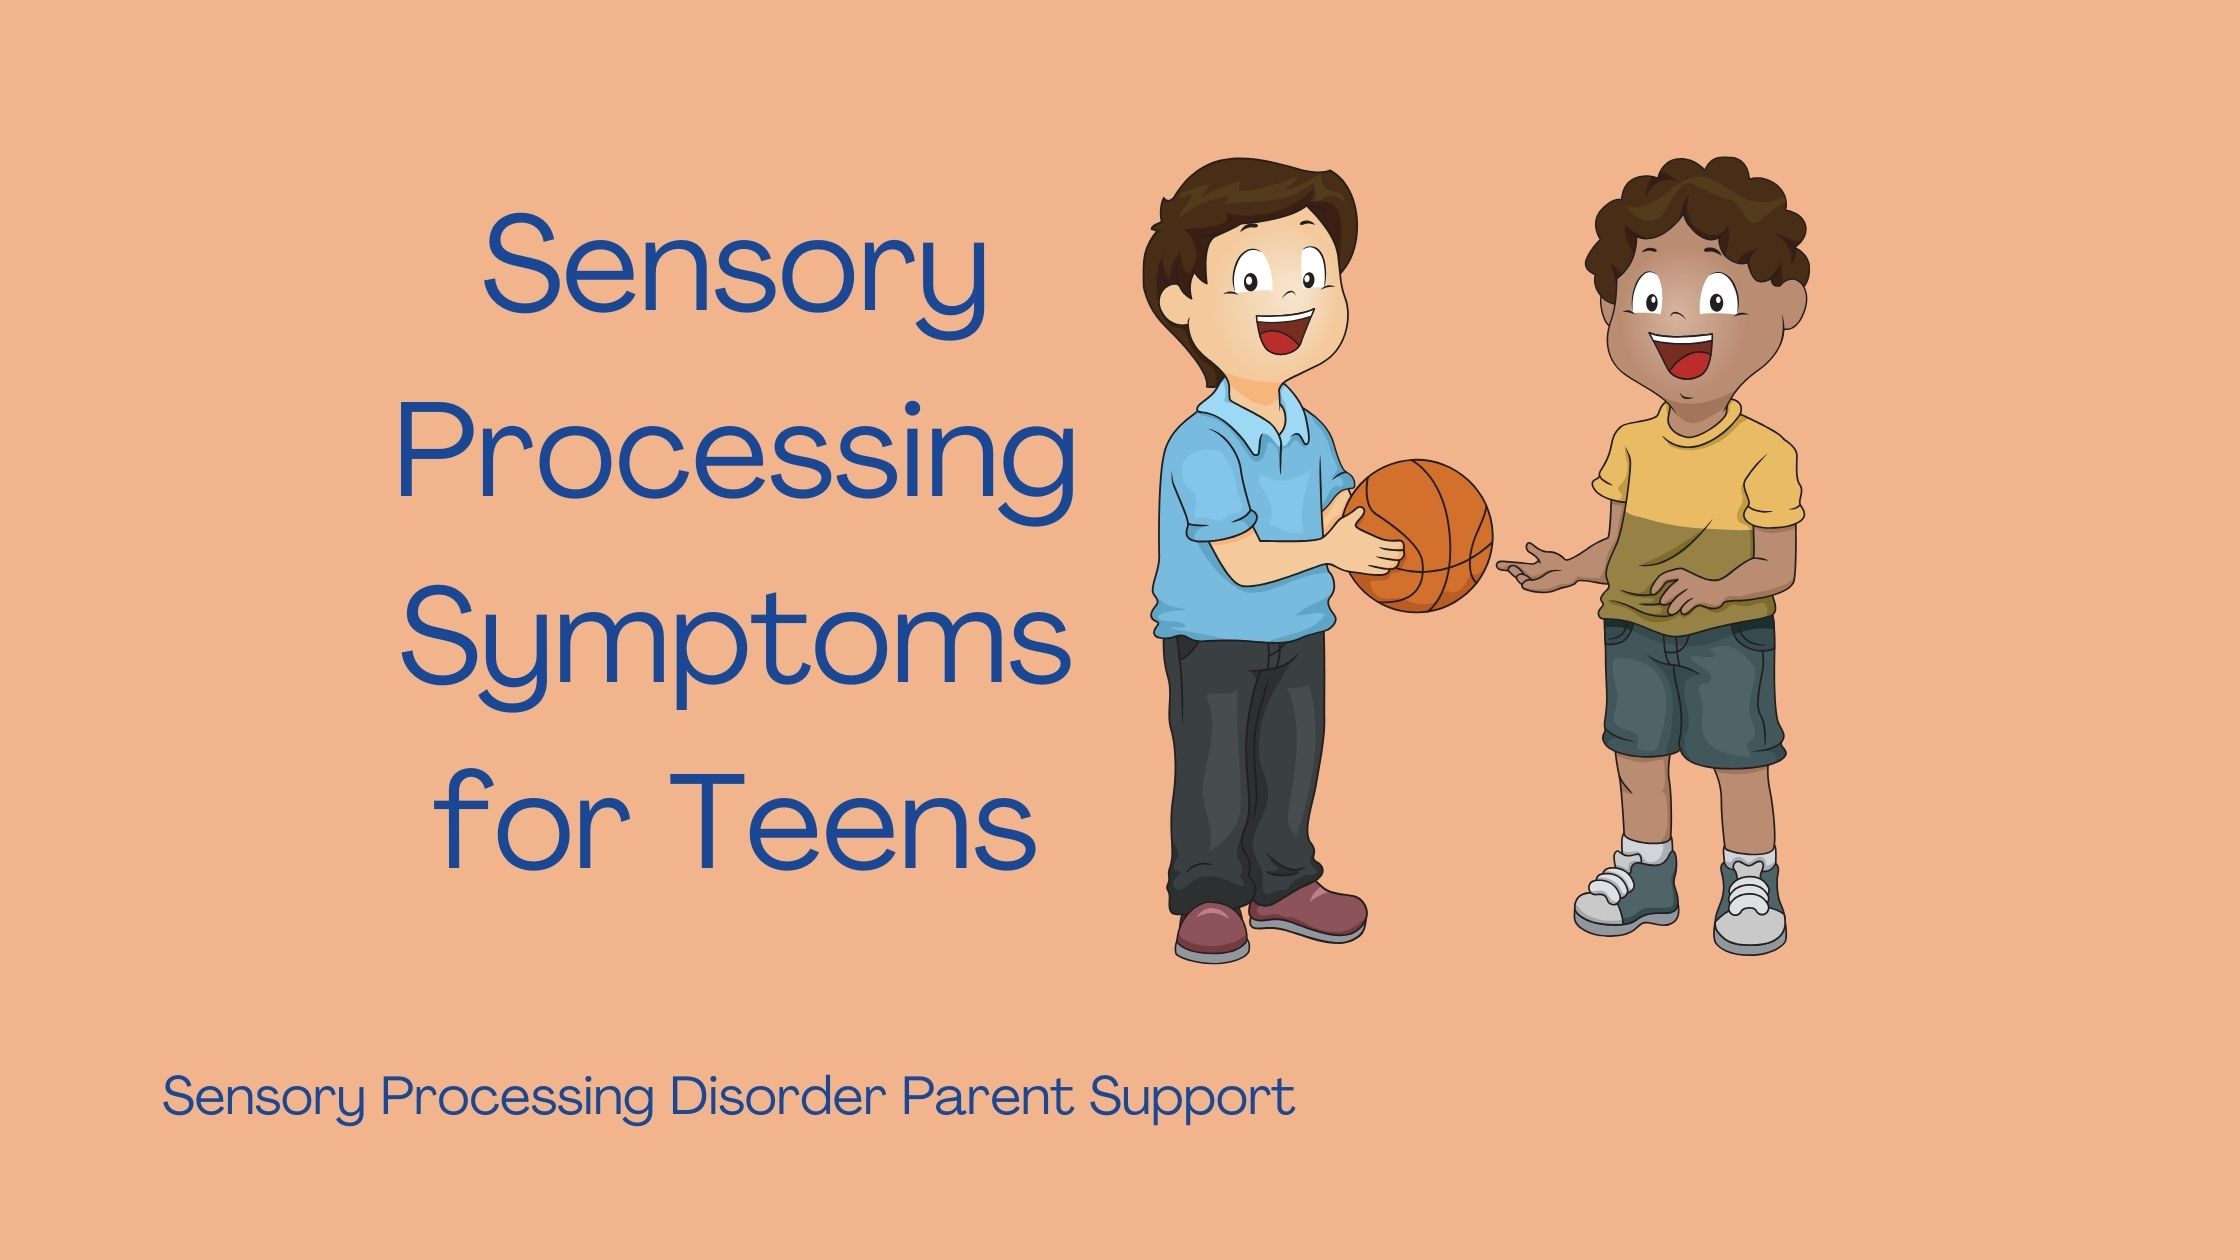 two teens who have sensory processing disorder playing basketball Sensory Processing Symptoms for Teens